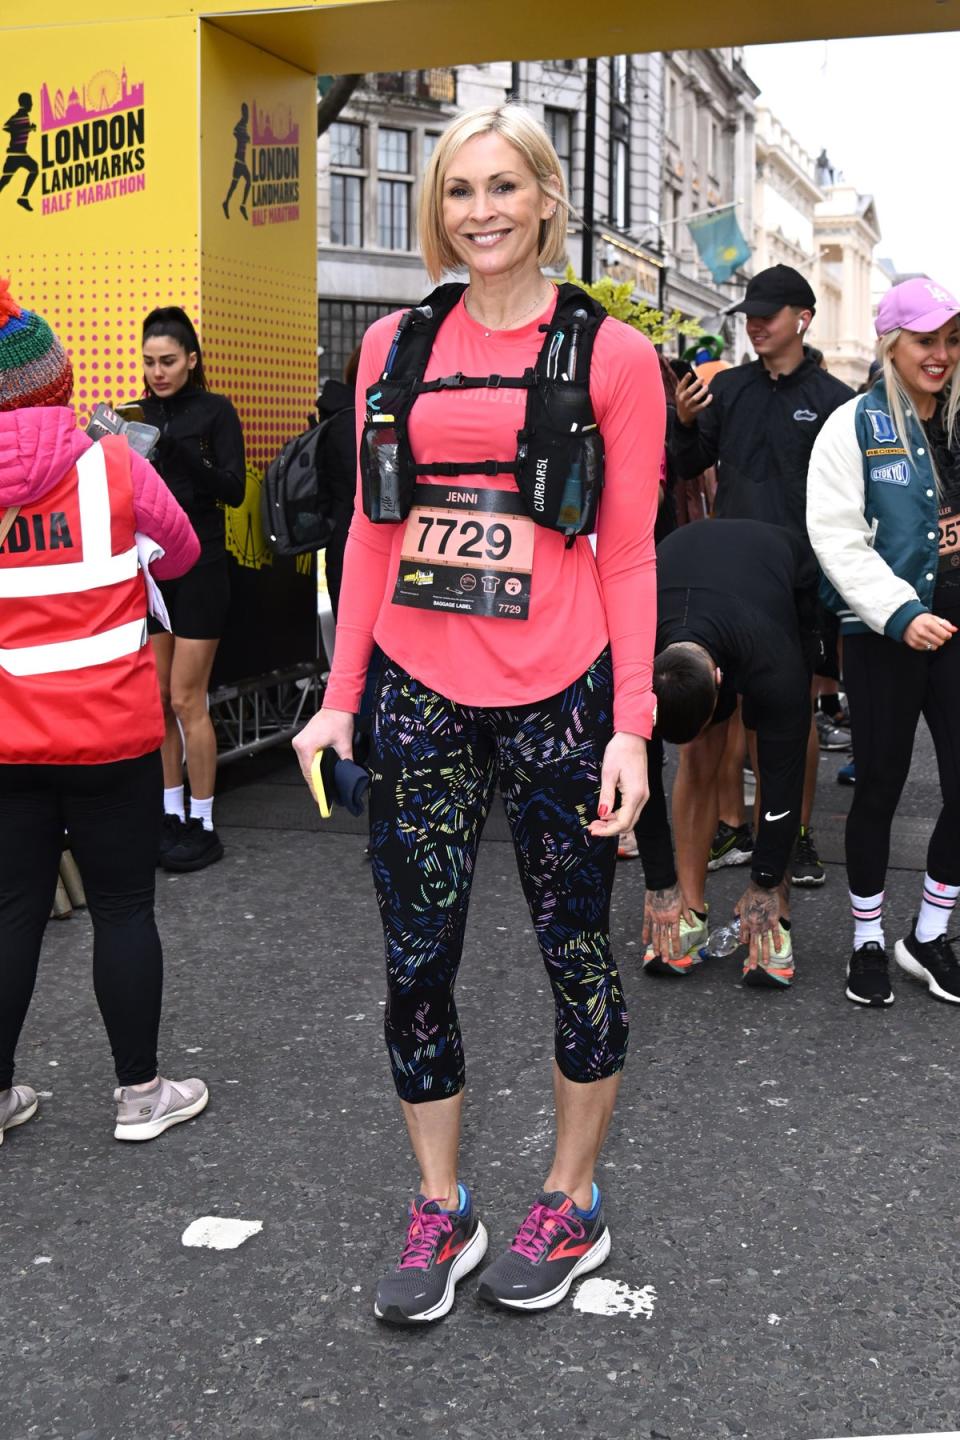 TV presenter Jenni Falconer is among this year's A-list running contingent (LLHM)